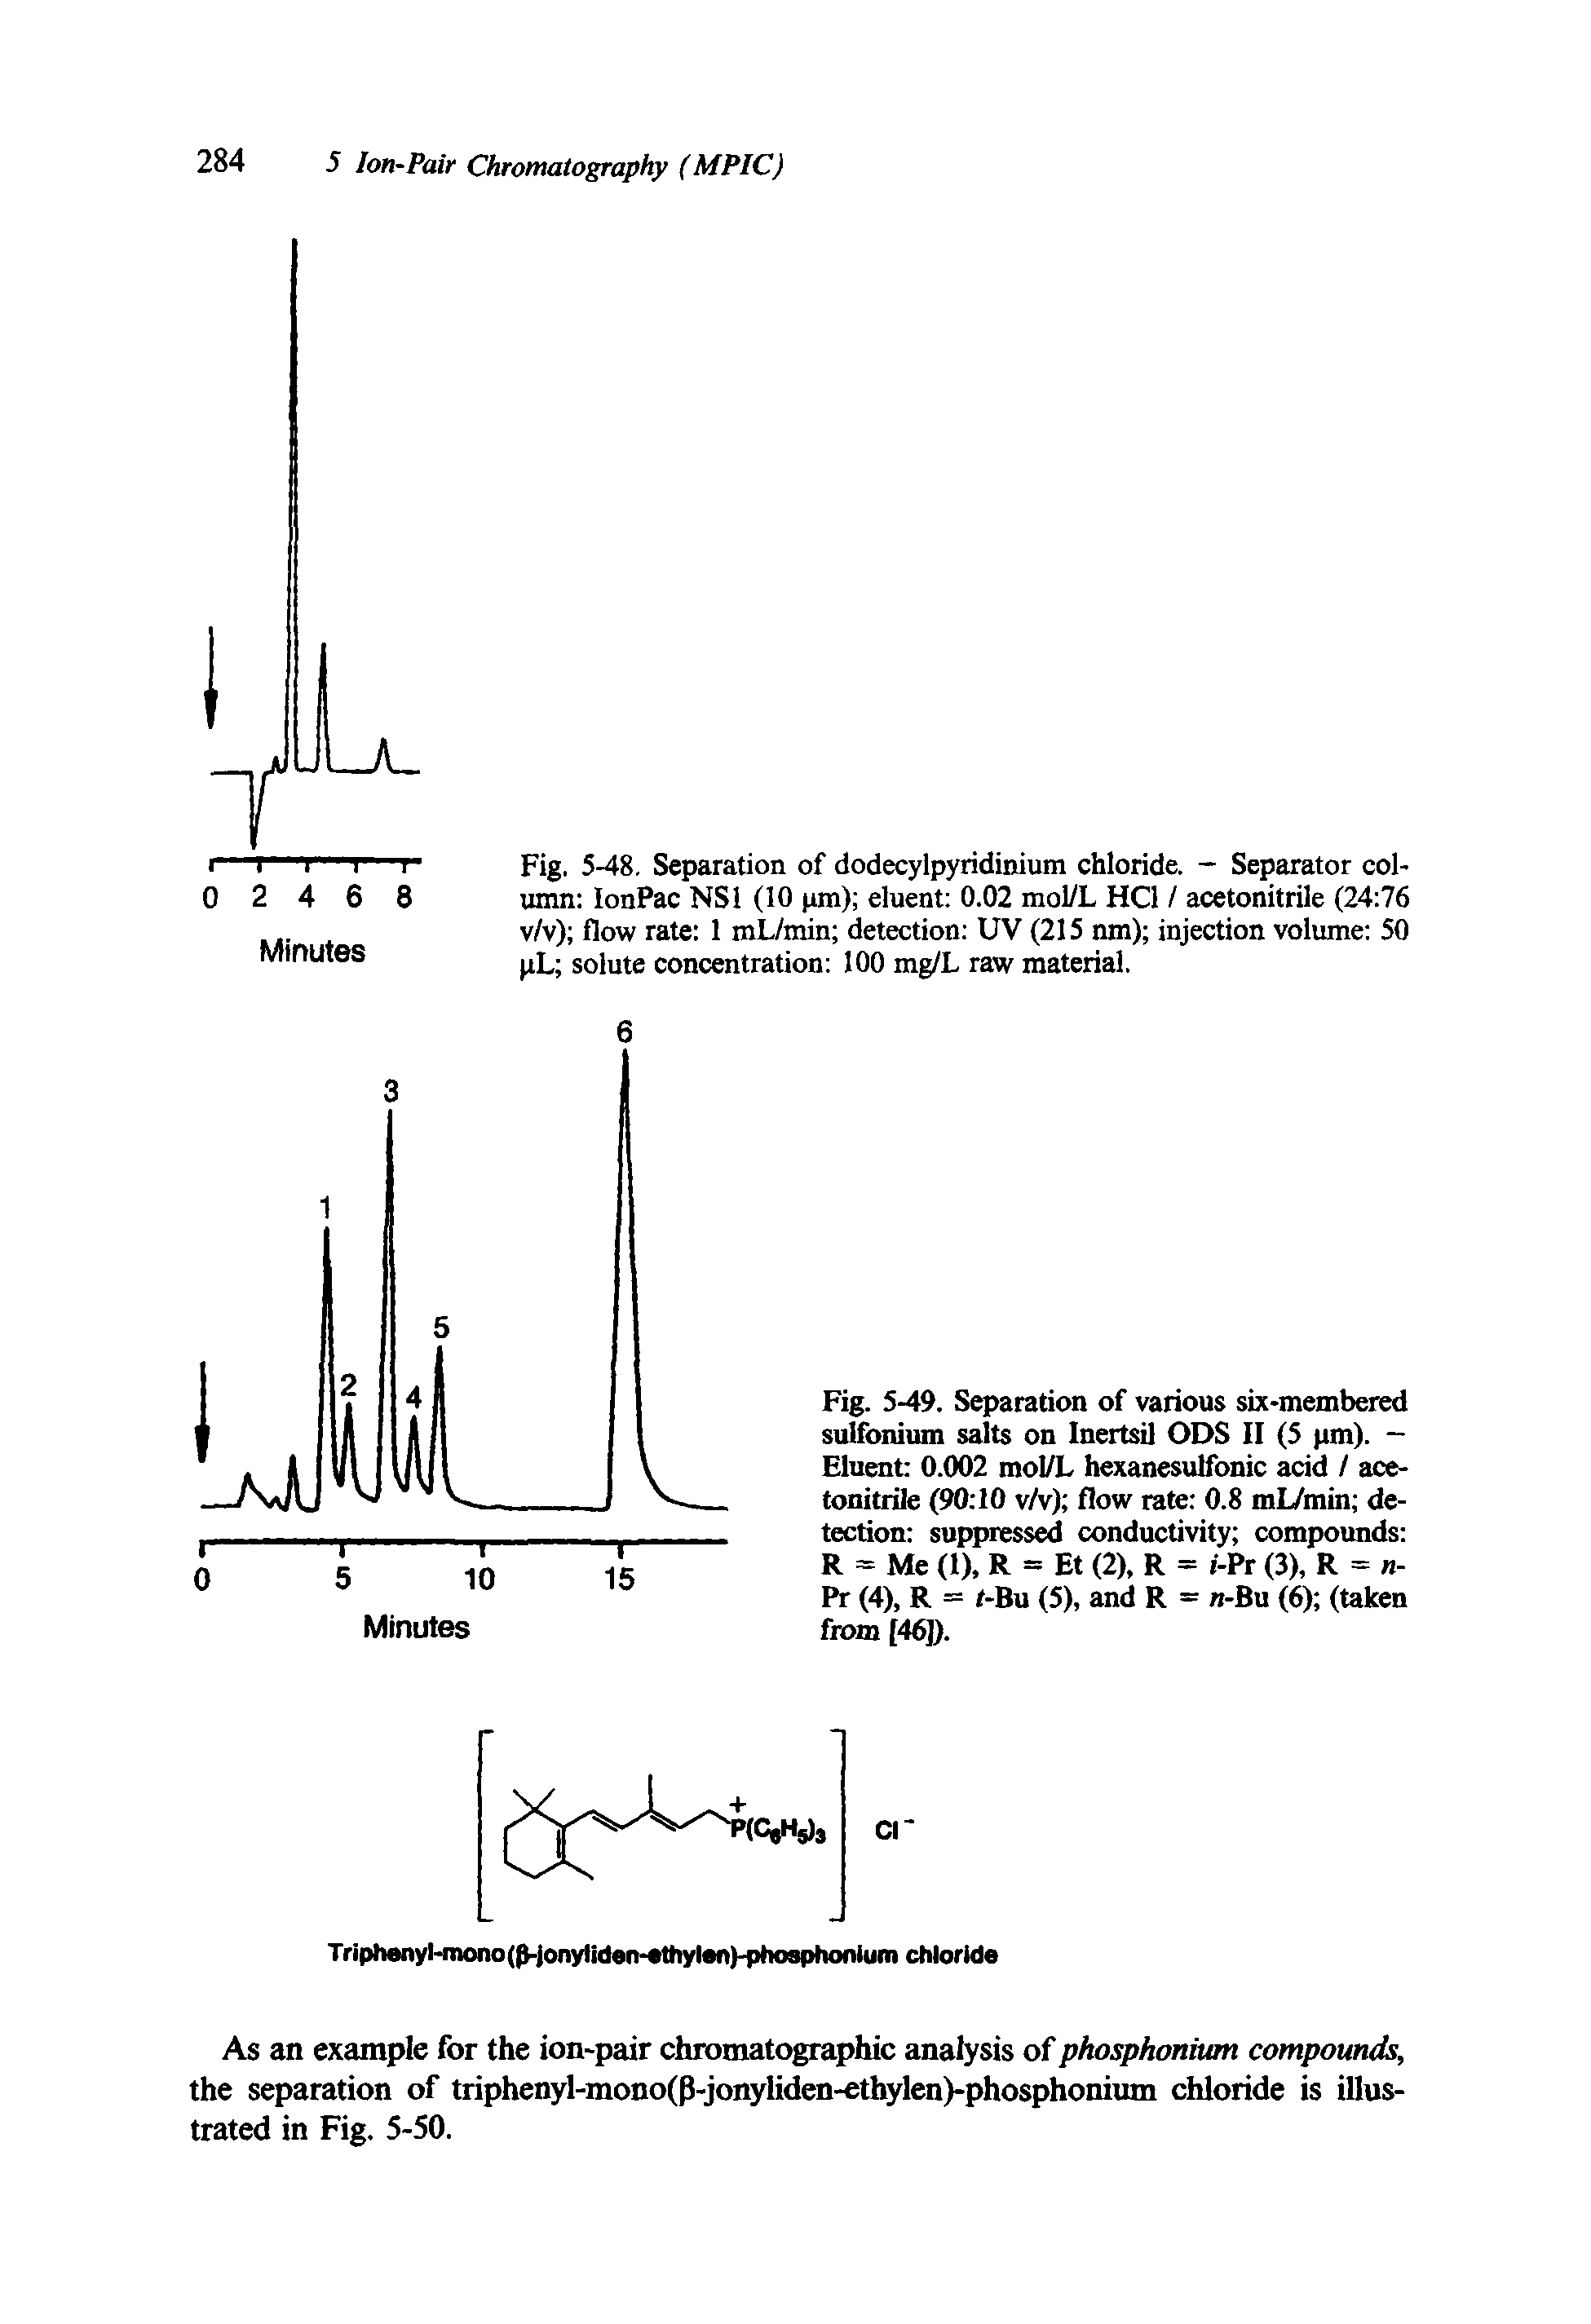 Fig. 5-48. Separation of dodecylpyridinium chloride. - Separator column IonPac NS1 (10 pm) eluent 0.02 mol/L HC1 / acetonitrile (24 76 v/v) flow rate 1 mL/min detection UV (215 nm) injection volume 50 pL solute concentration 100 mg/L raw material.